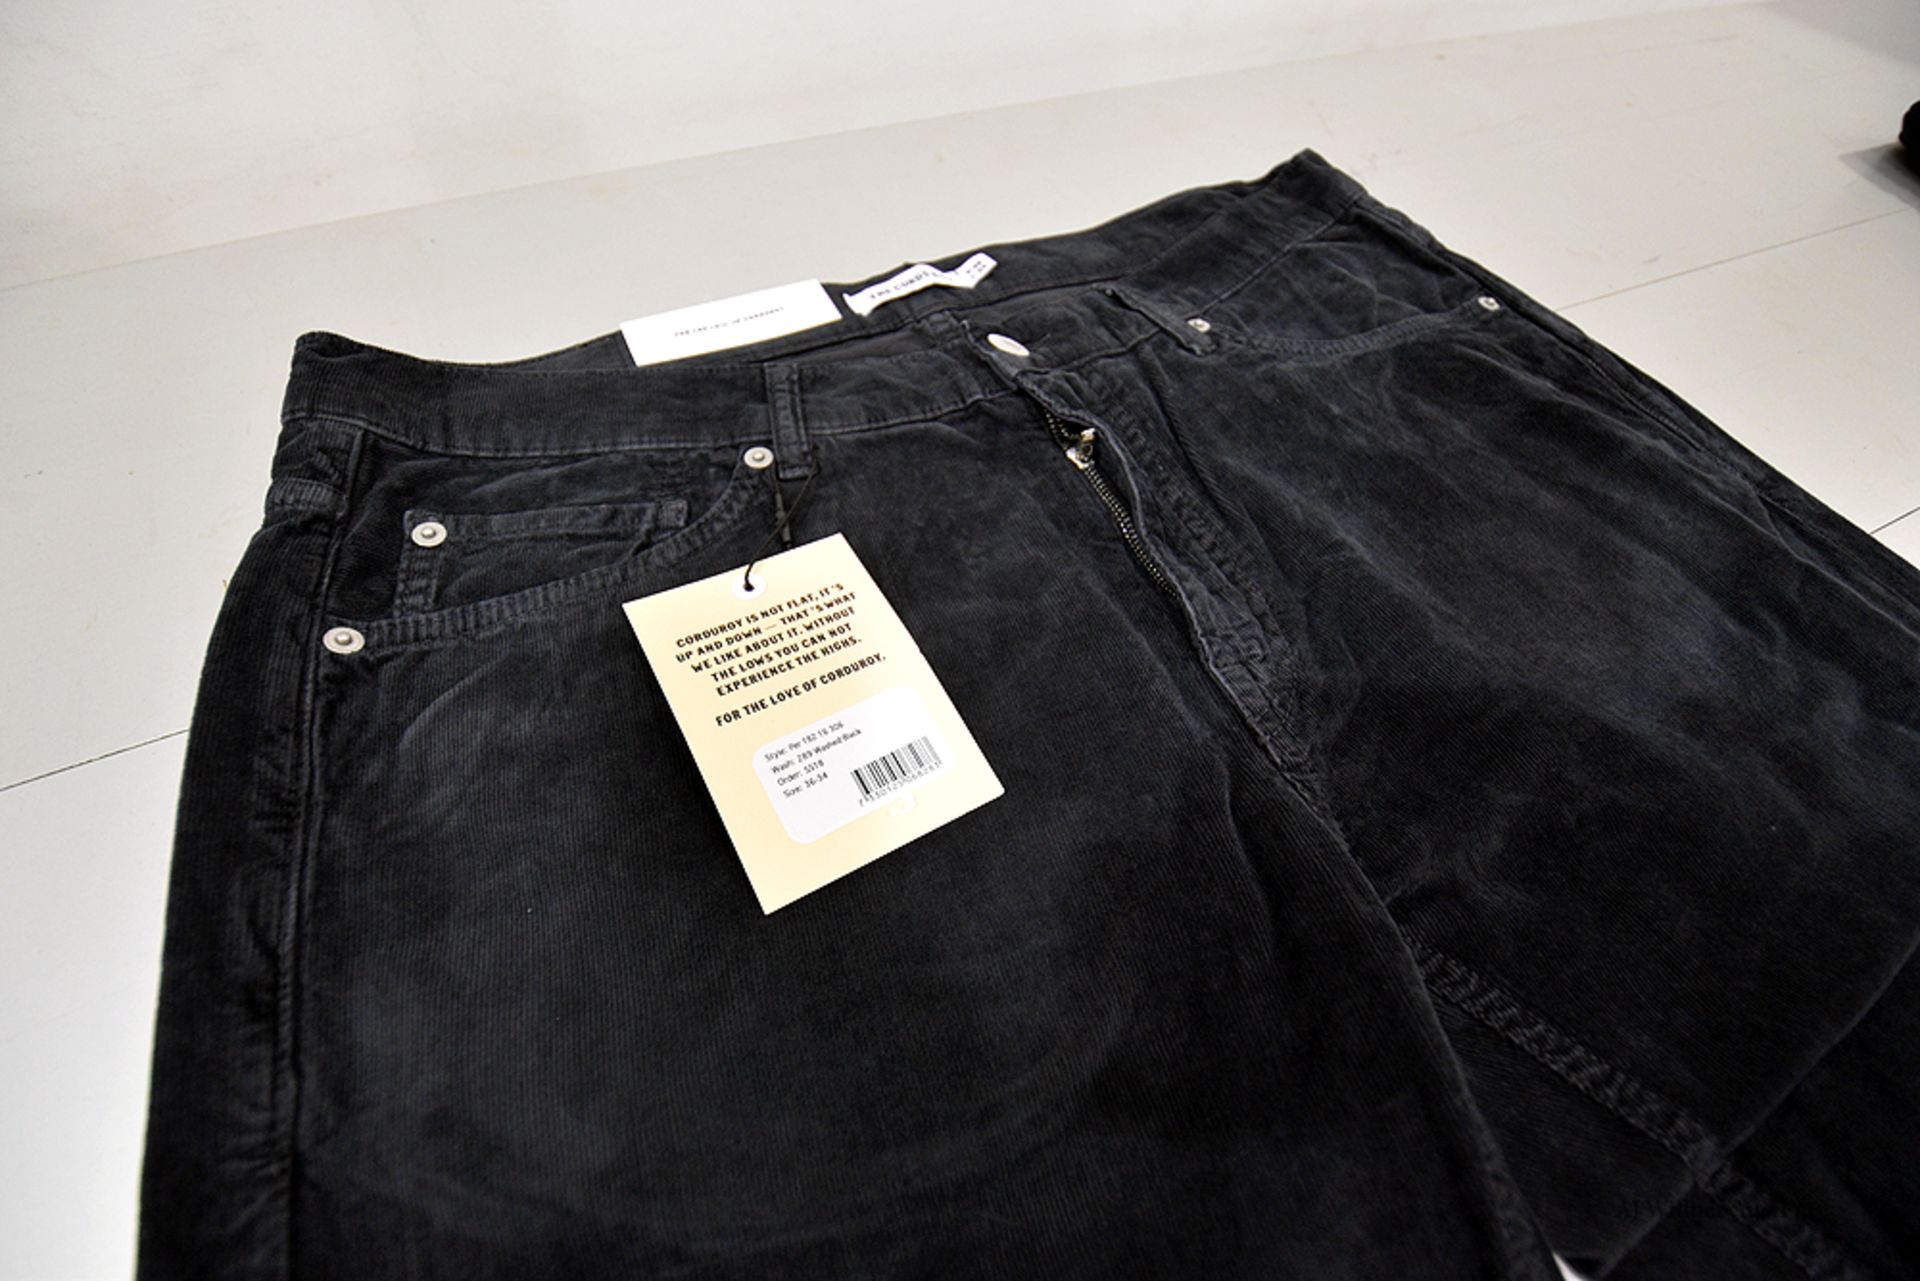 THE CORDS & CO. "PER" MEN'S/HIGH-WAIST/ STRAIGHT FIT/ NARROW LEG MSRP $160 - Image 4 of 5